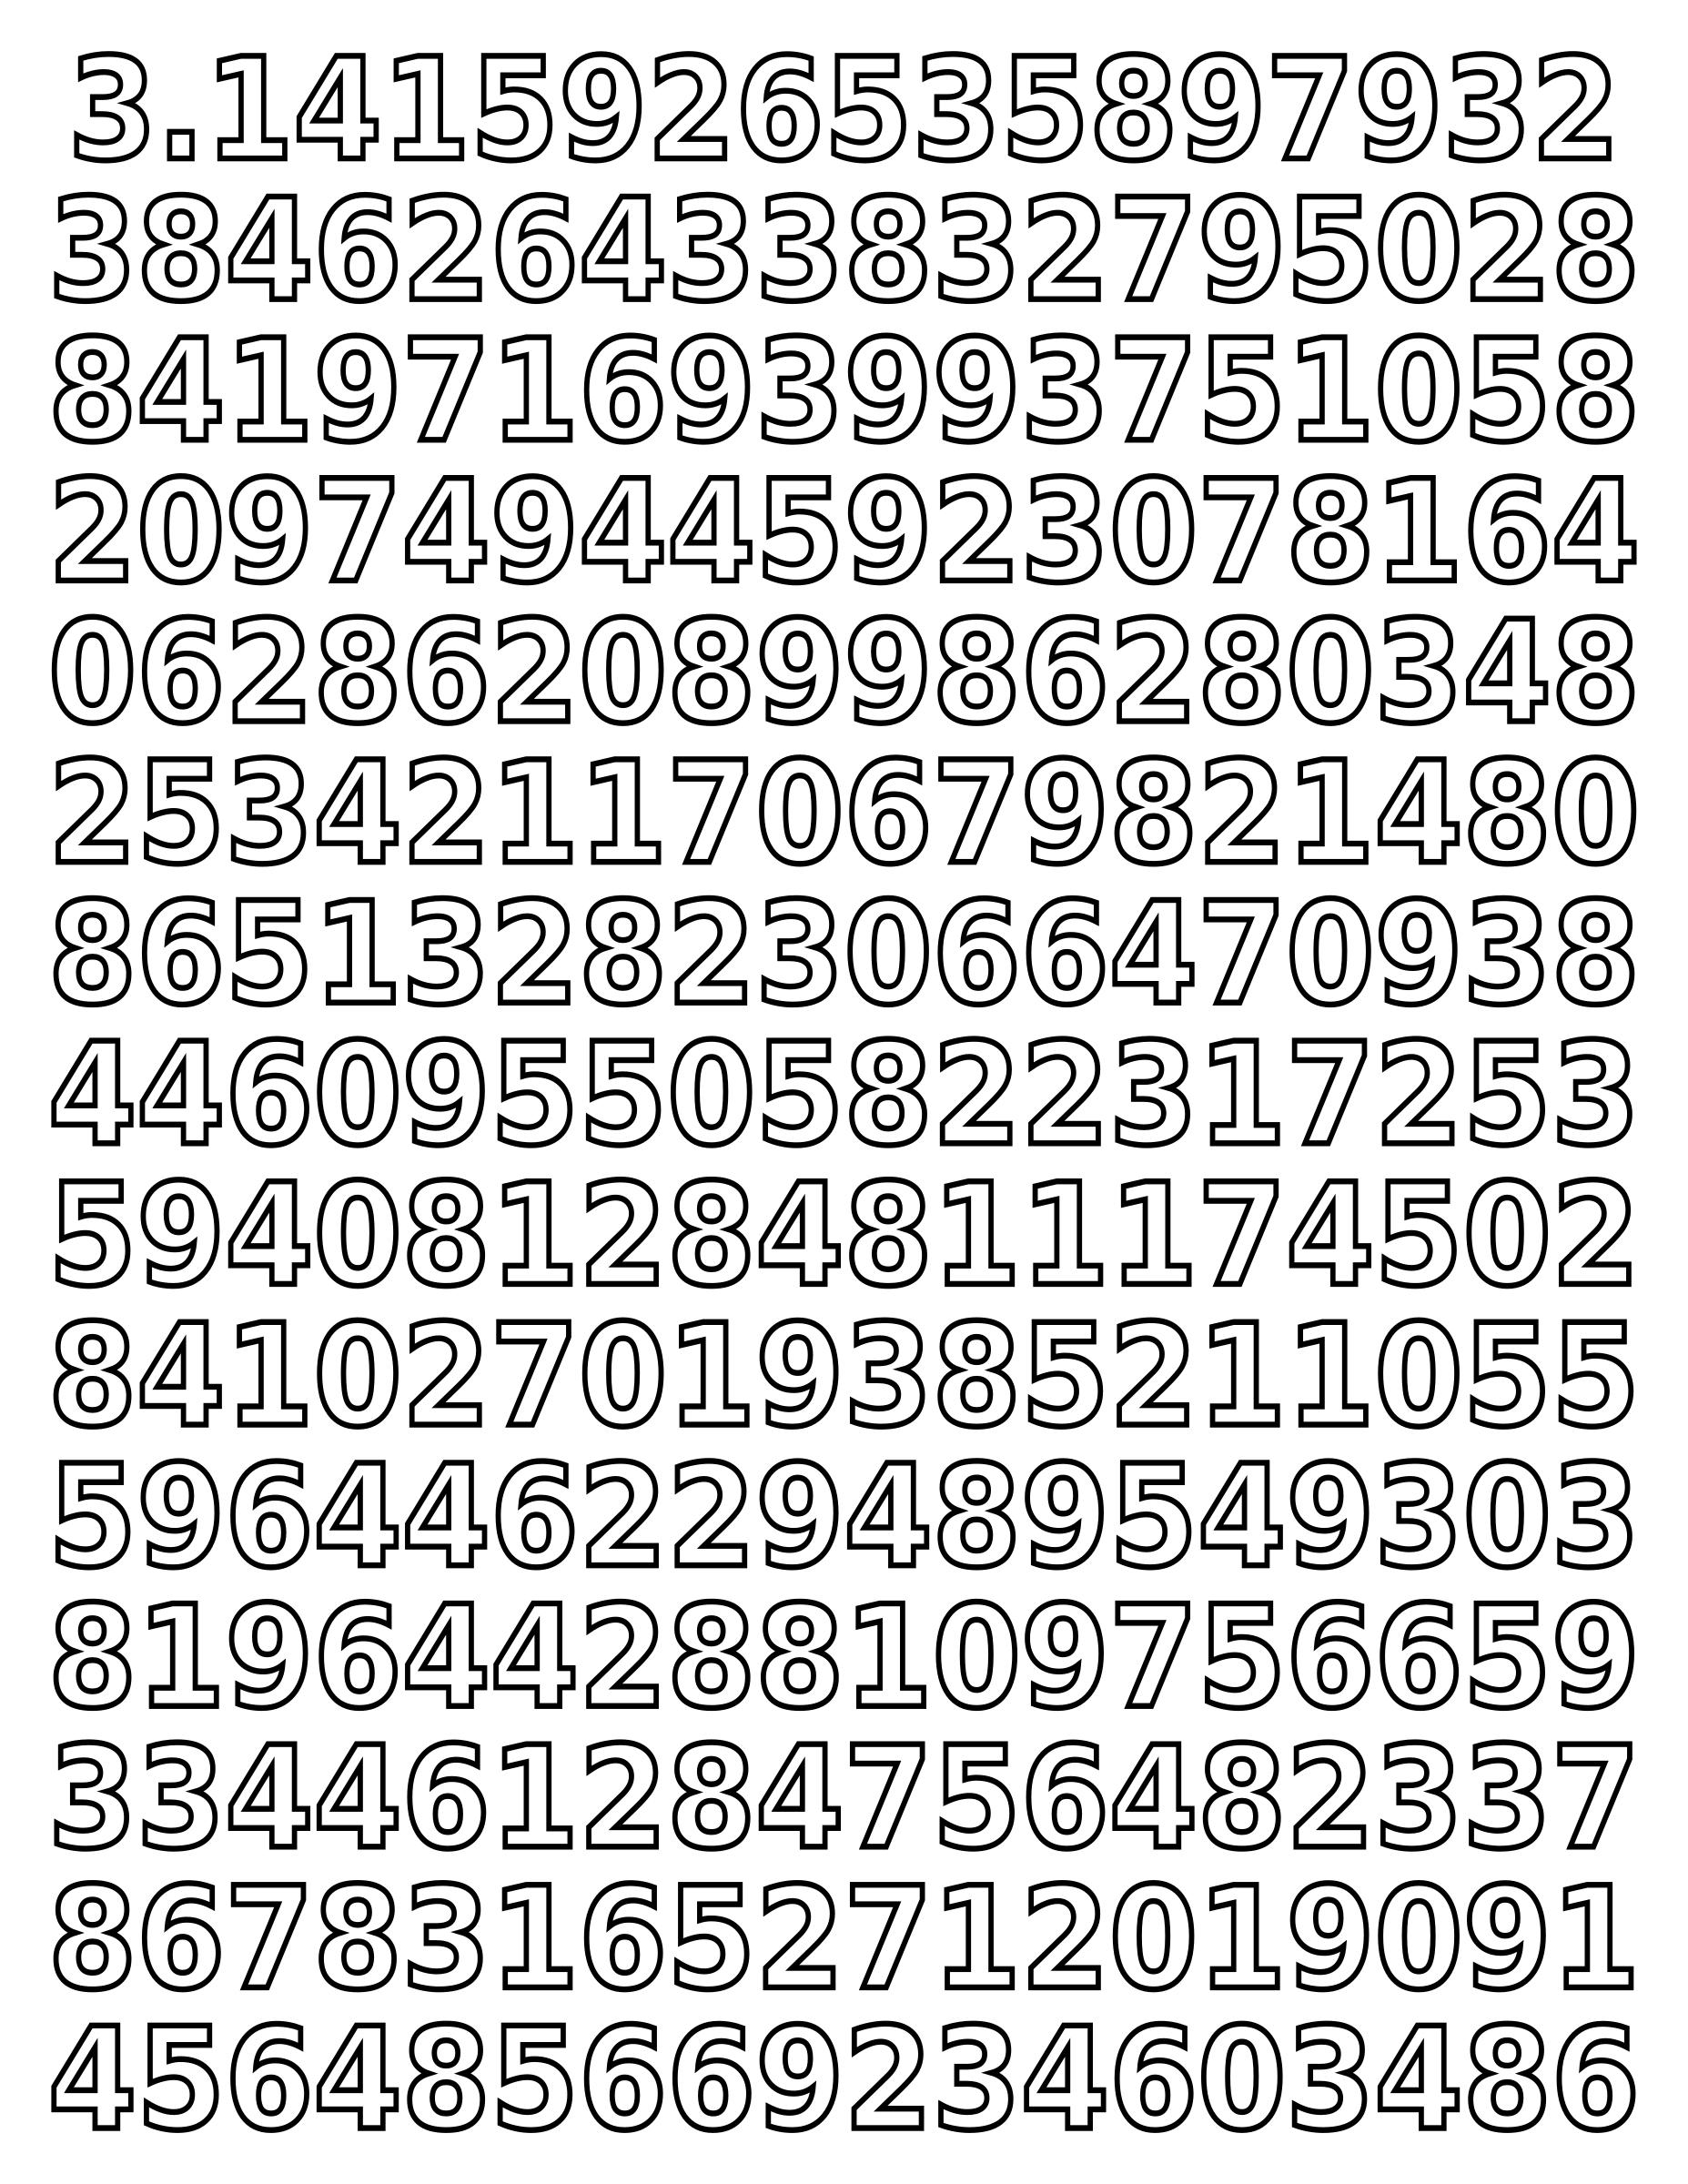 Coloring page - pi day digits of pi small png icons